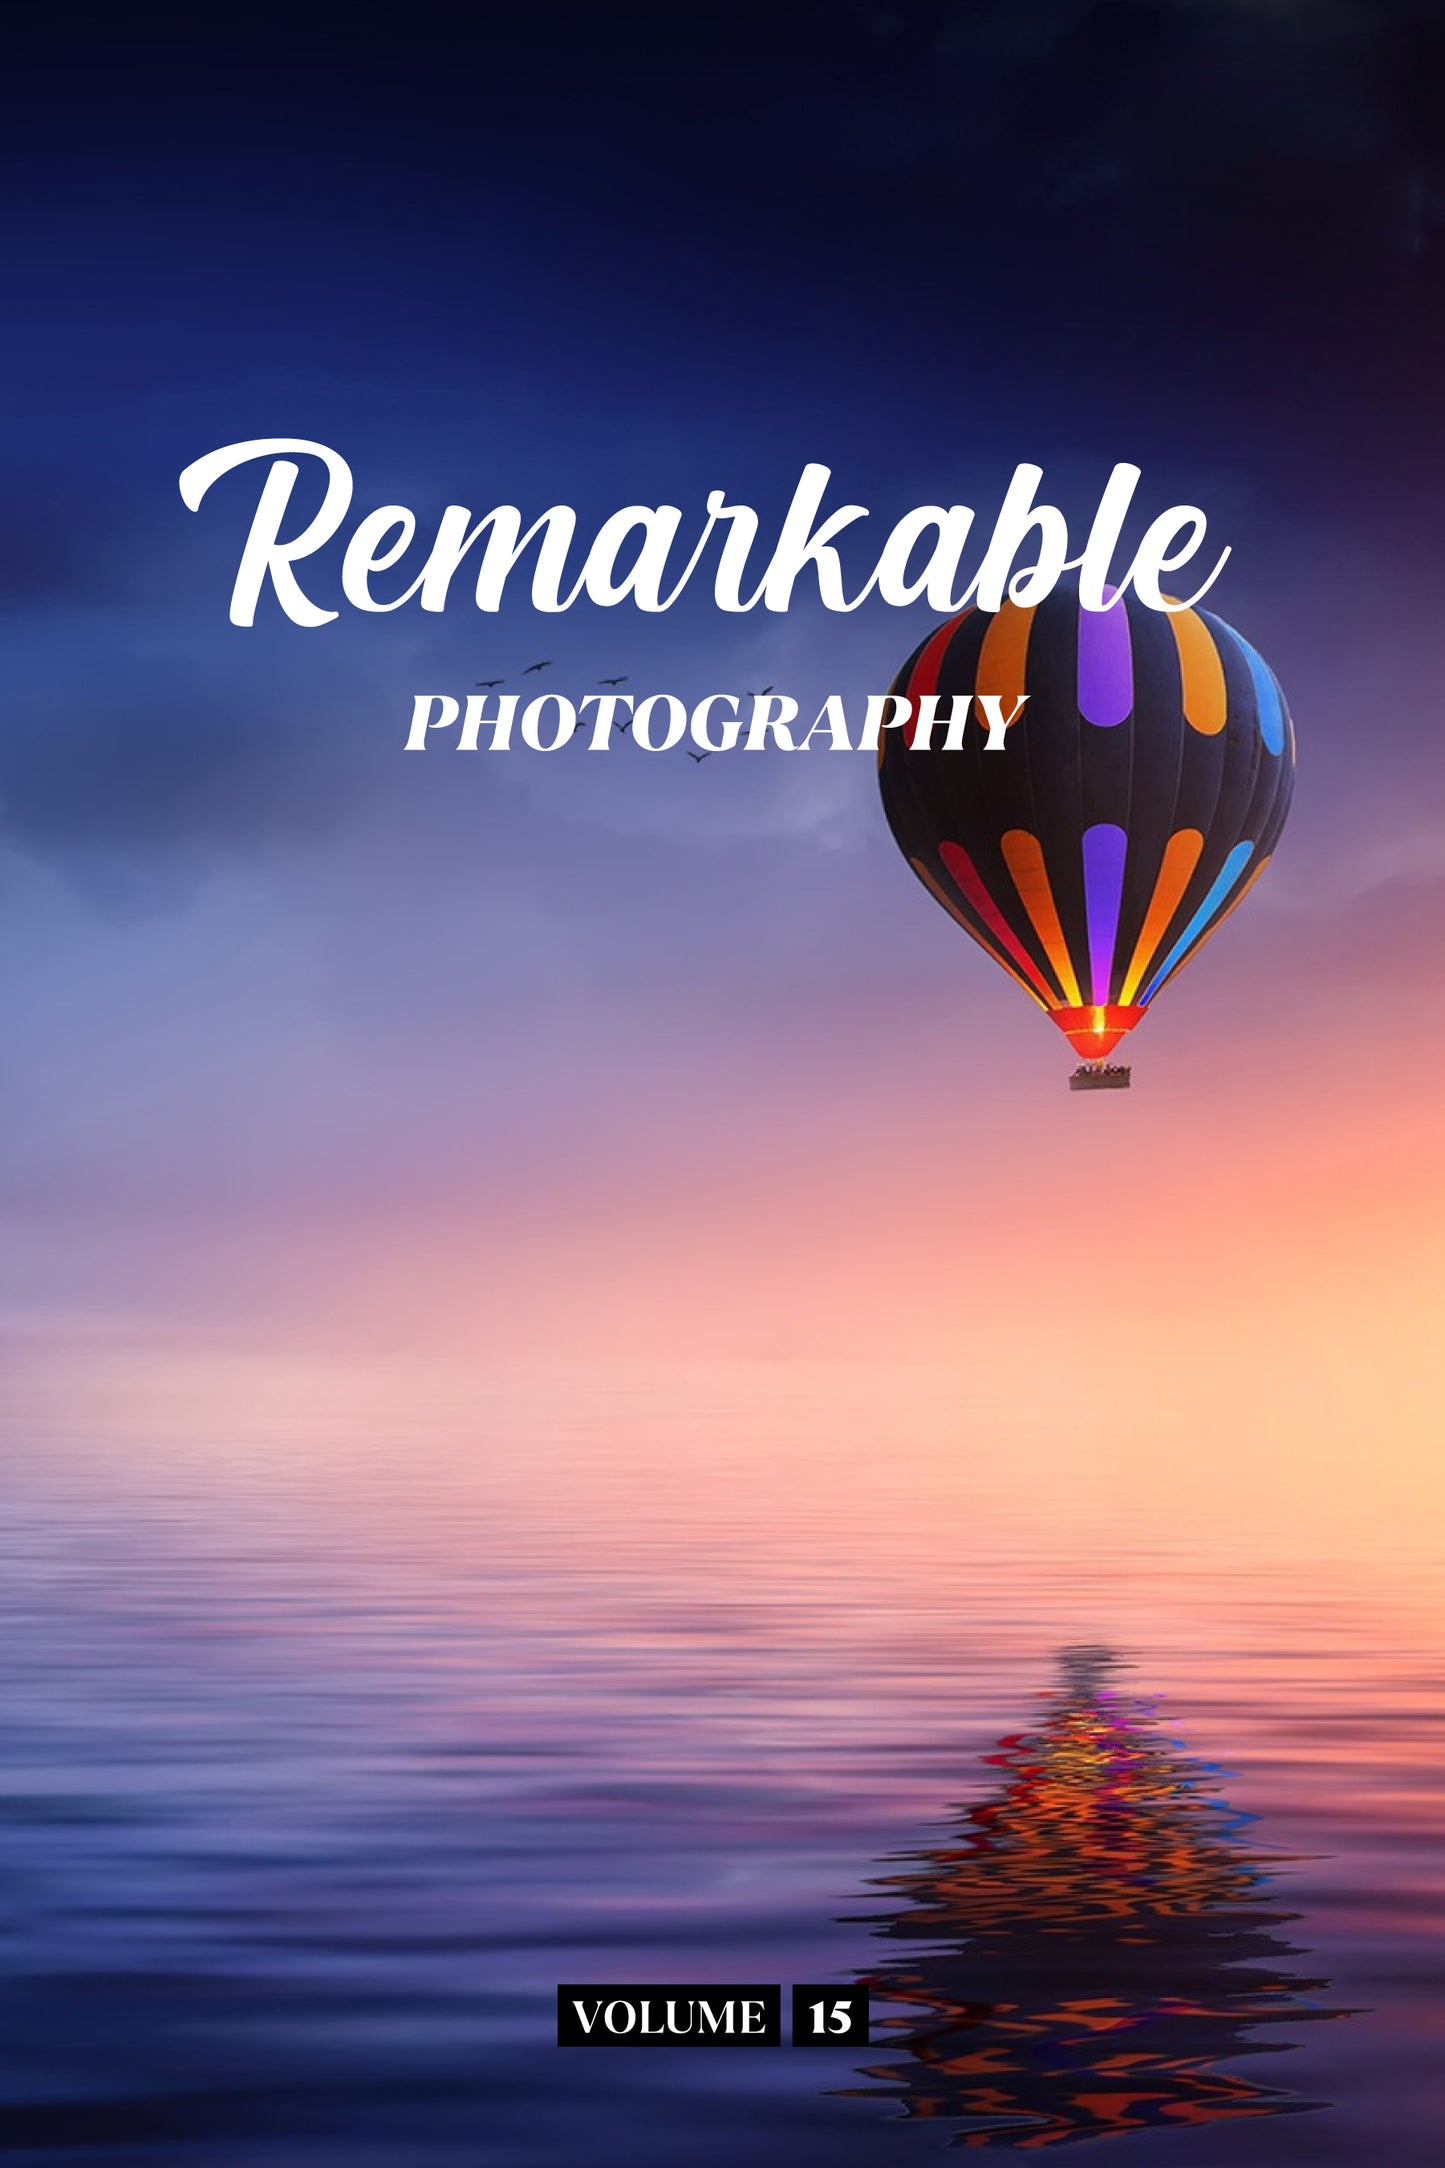 Remarkable Photography Volume 15 (Physical Book)